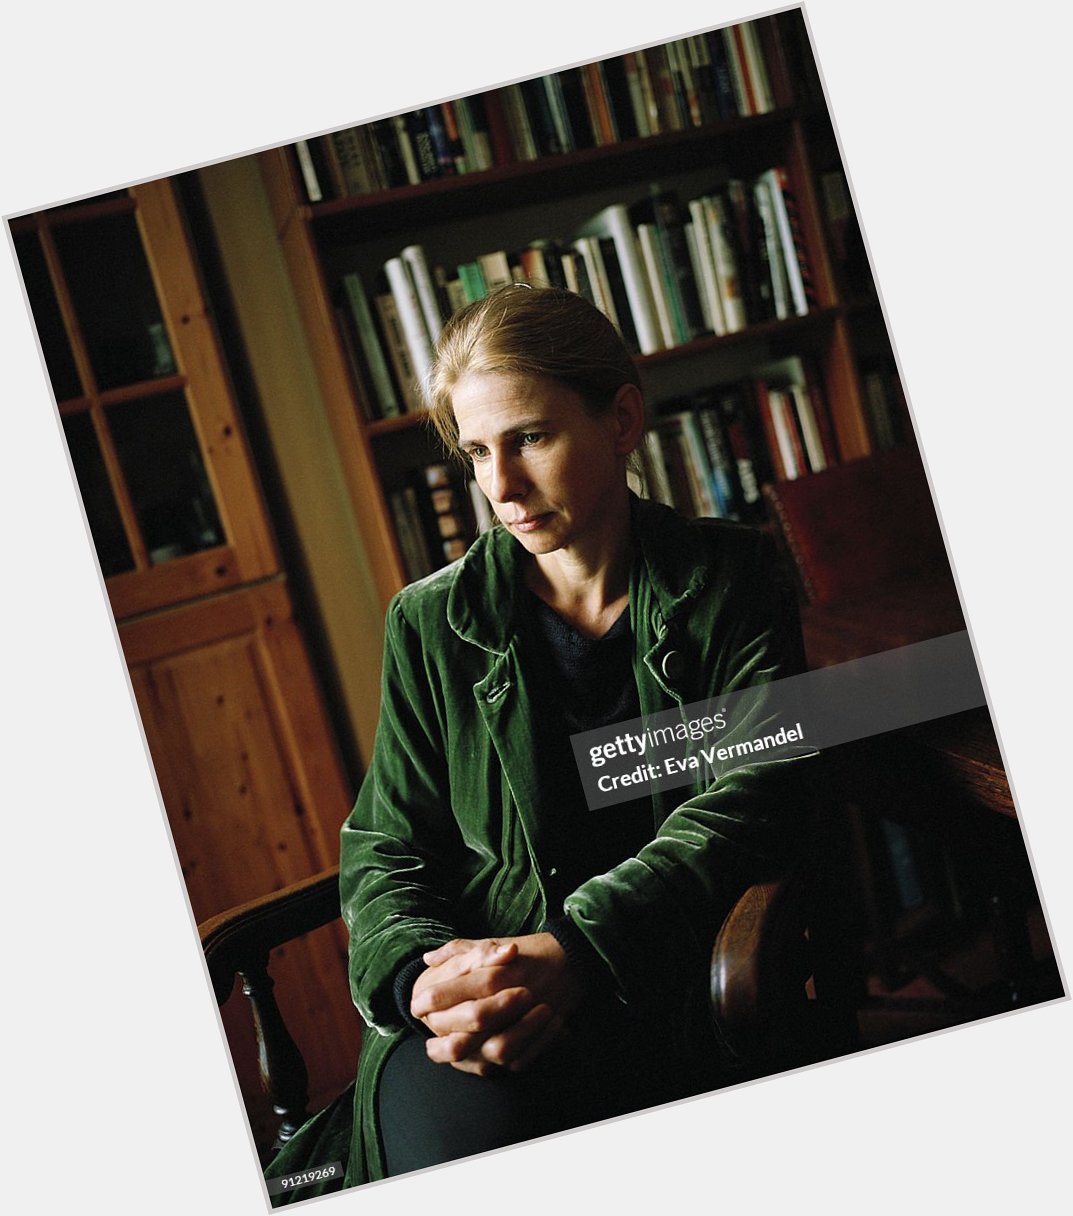 Http://fanpagepress.net/m/L/Lionel Shriver Hairstyle 6